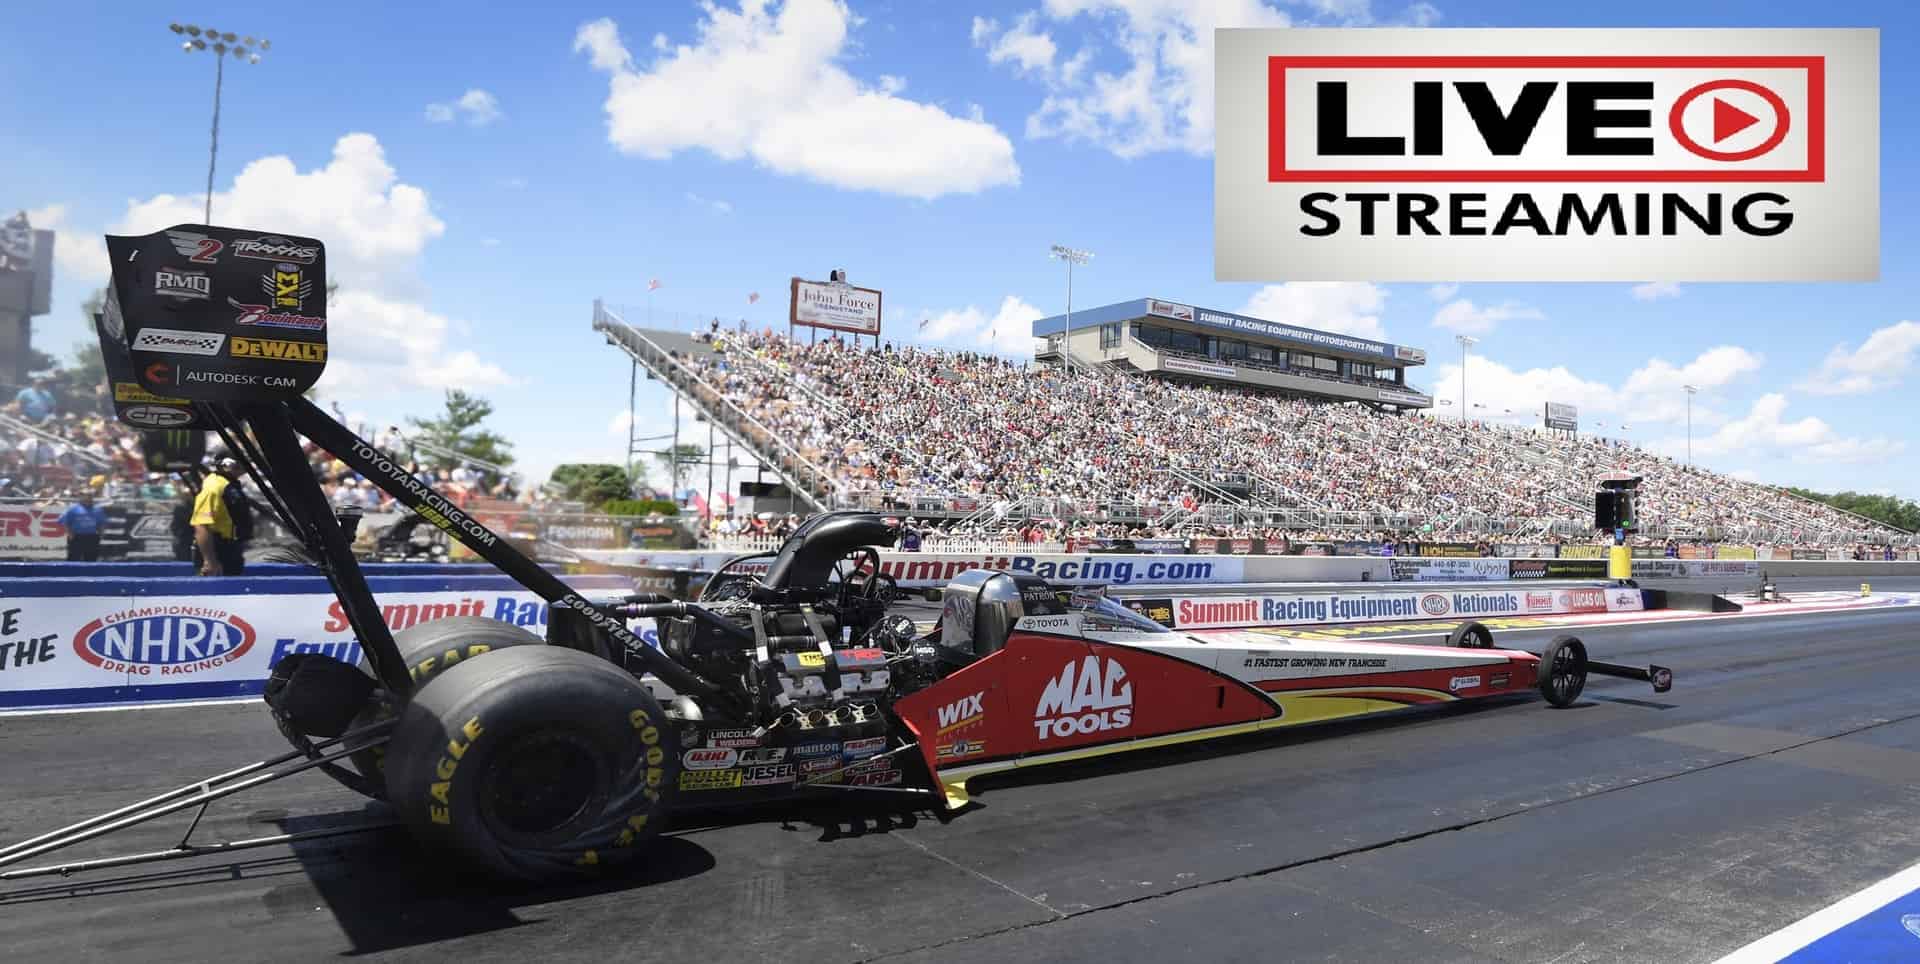 2015-nhra-cecil-county-dragway-race-live-streaming